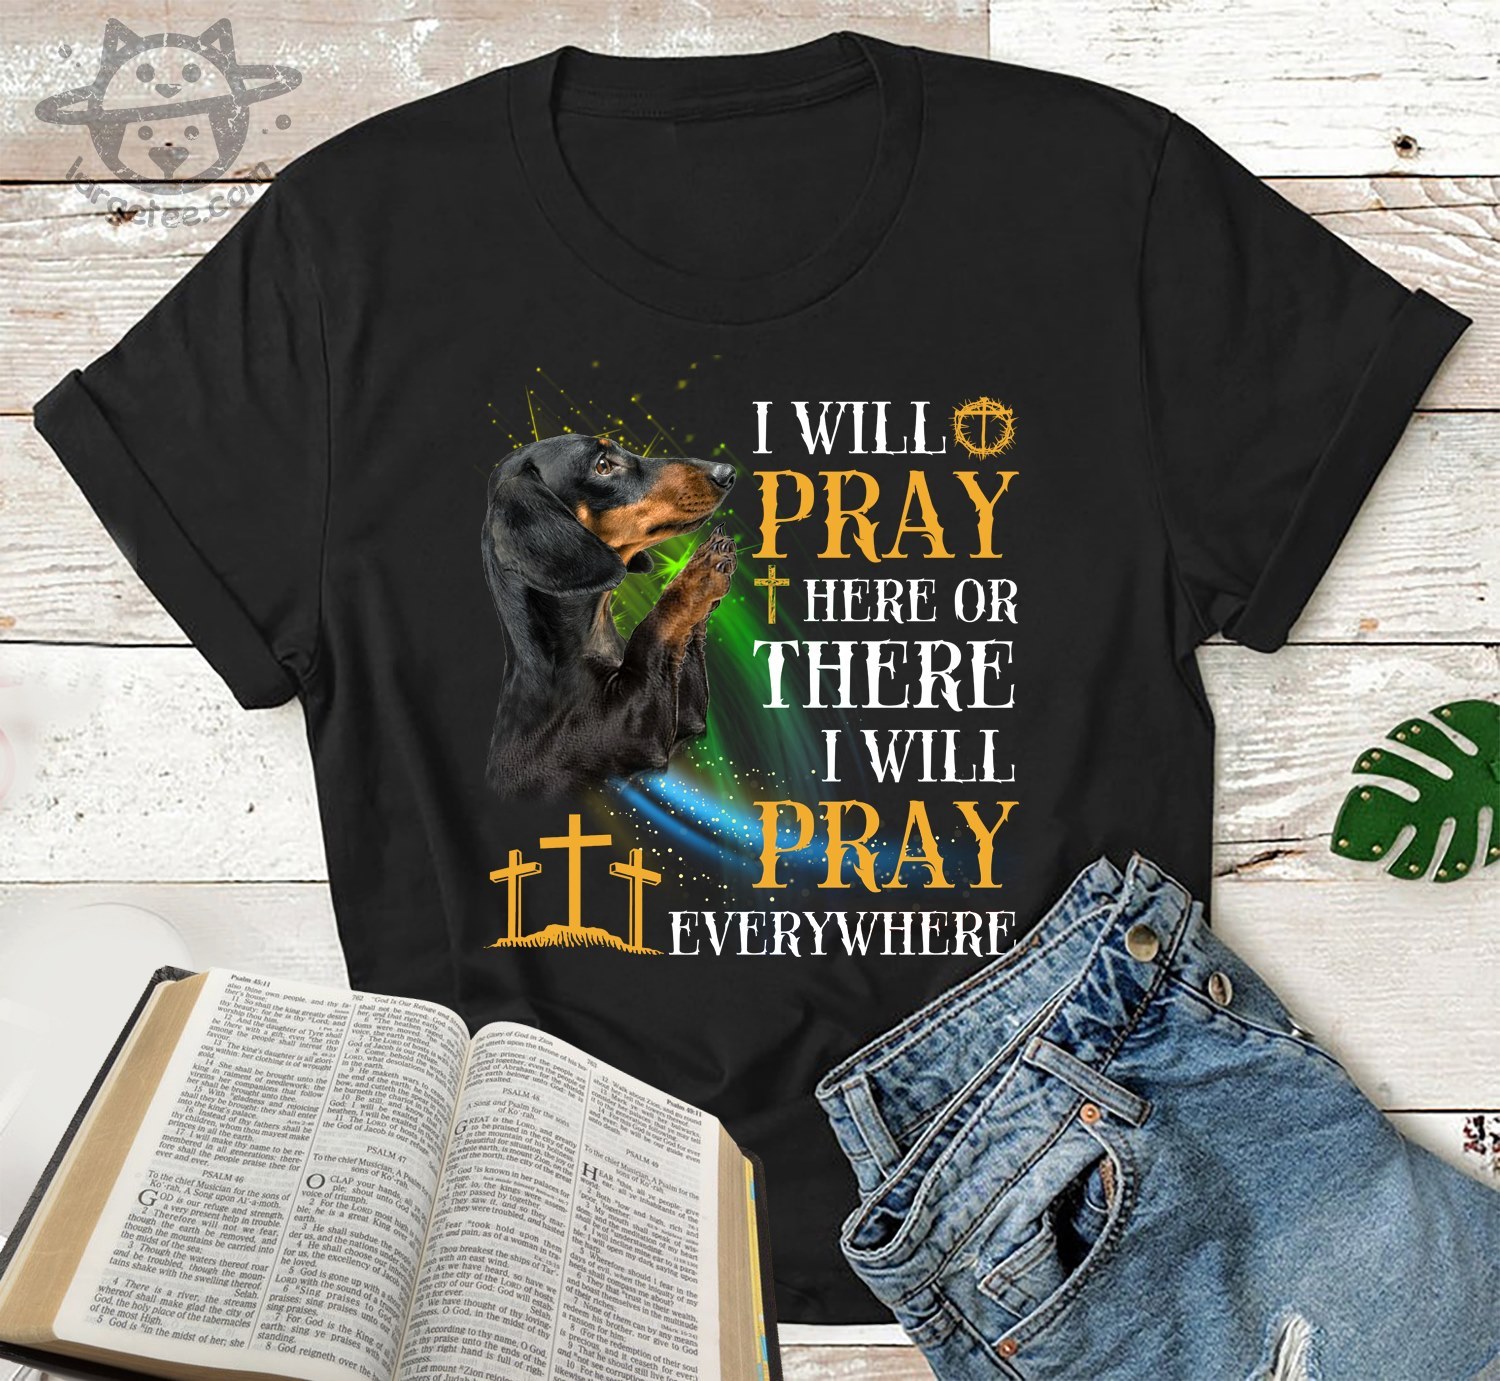 I will pray here or there I will pray everywhre - Dachshund dog